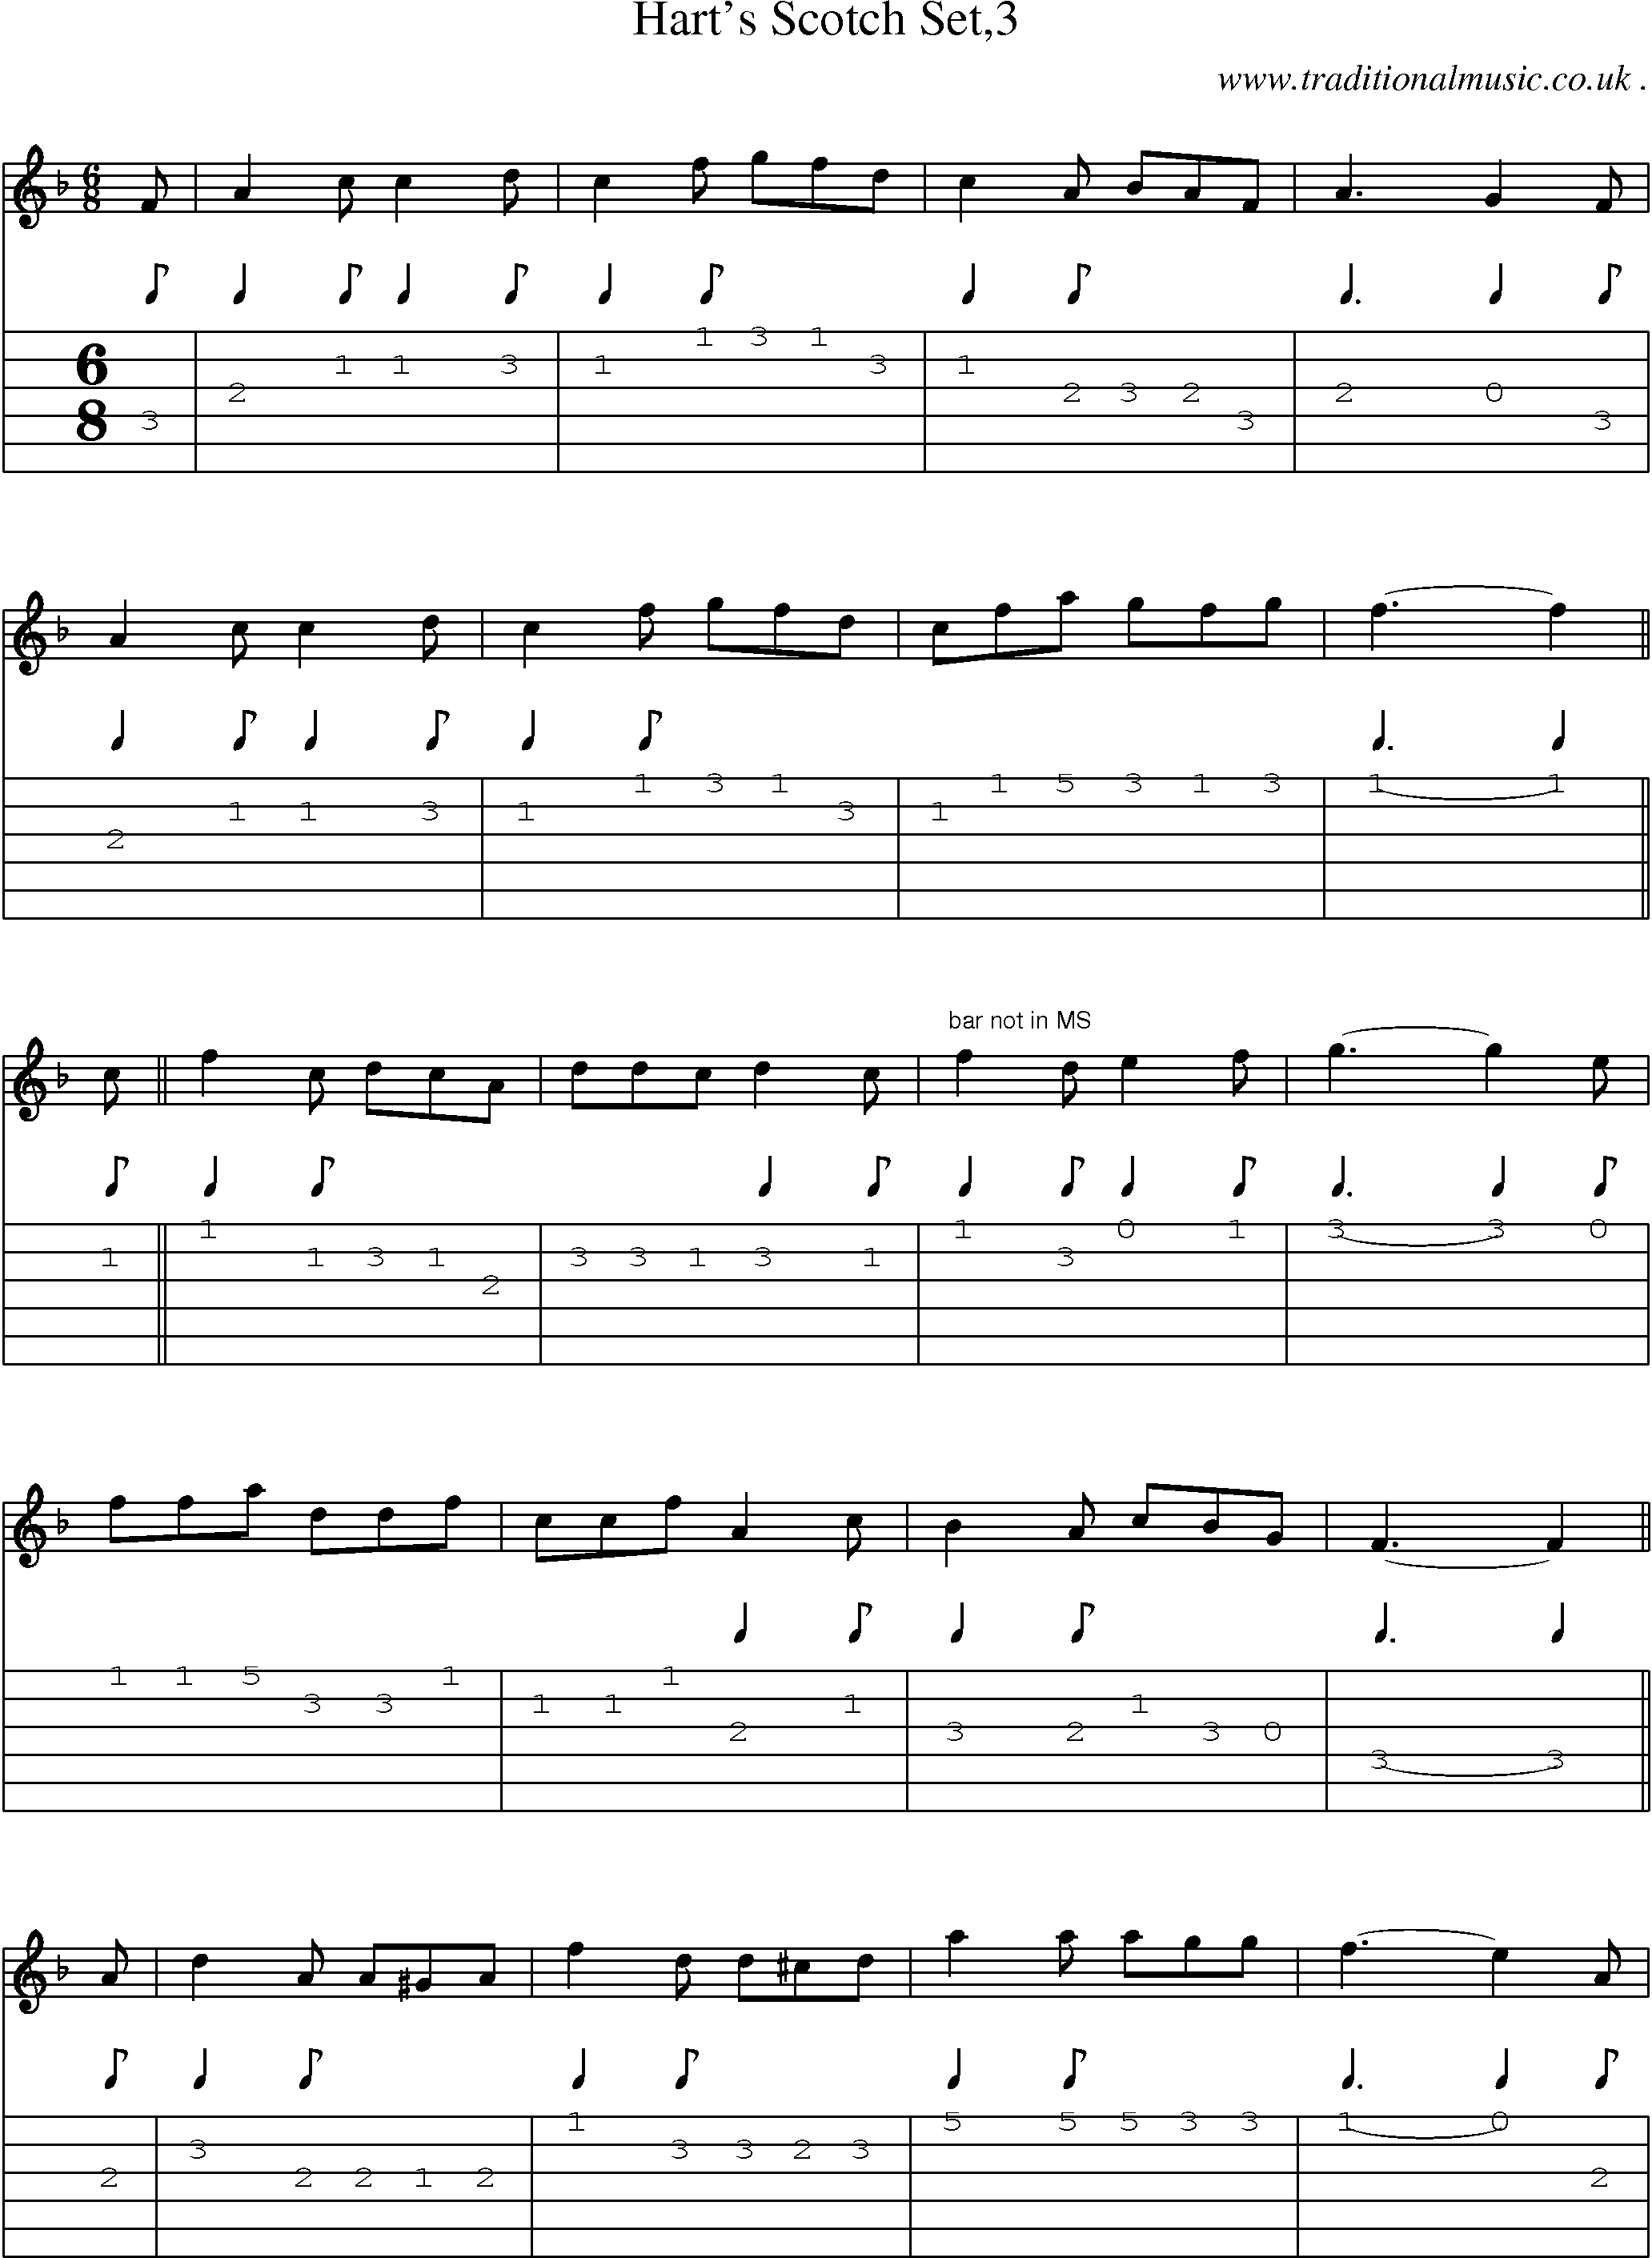 Sheet-Music and Guitar Tabs for Harts Scotch Set3